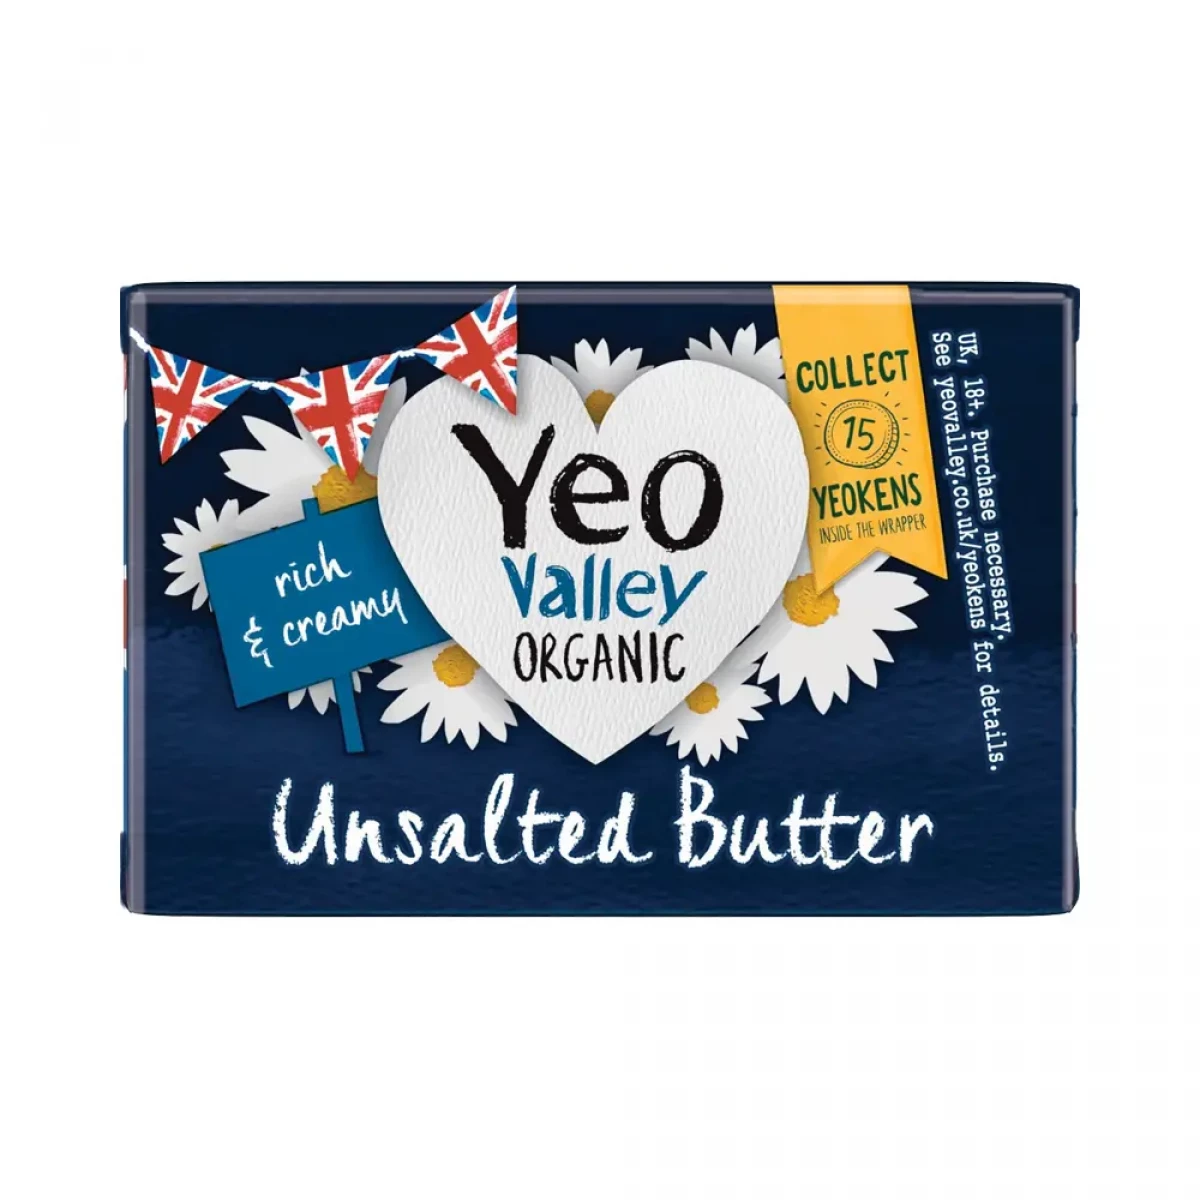 Product picture for Organic Unsalted Butter